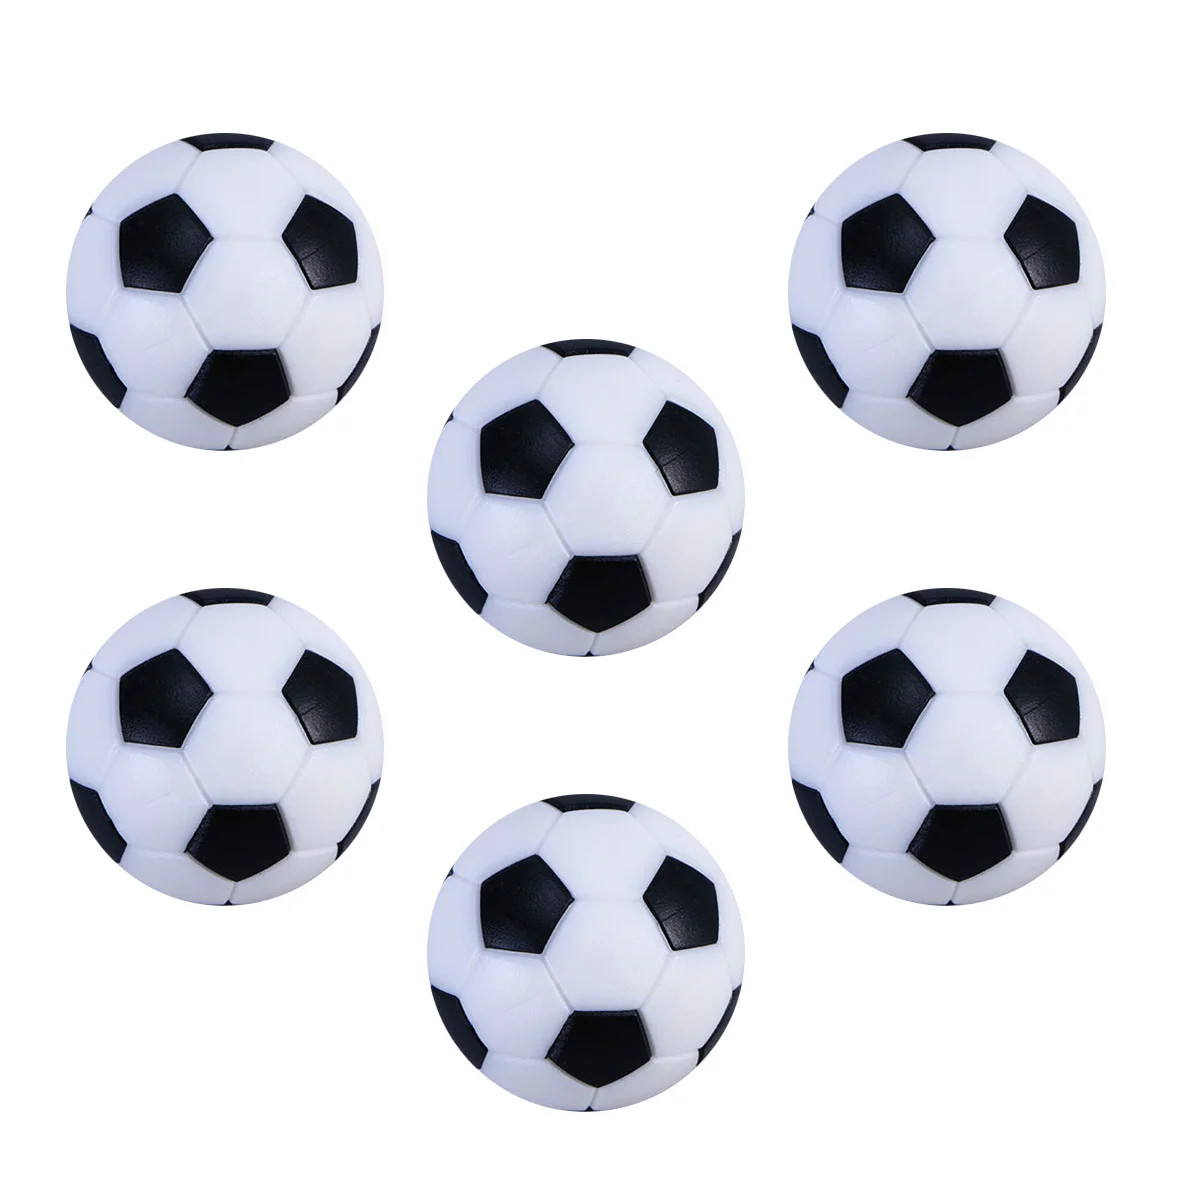 

Foosball Soccer Table Mini Football Replacement Game Tabletop Foosballs Black White Official Sports Party Accessory